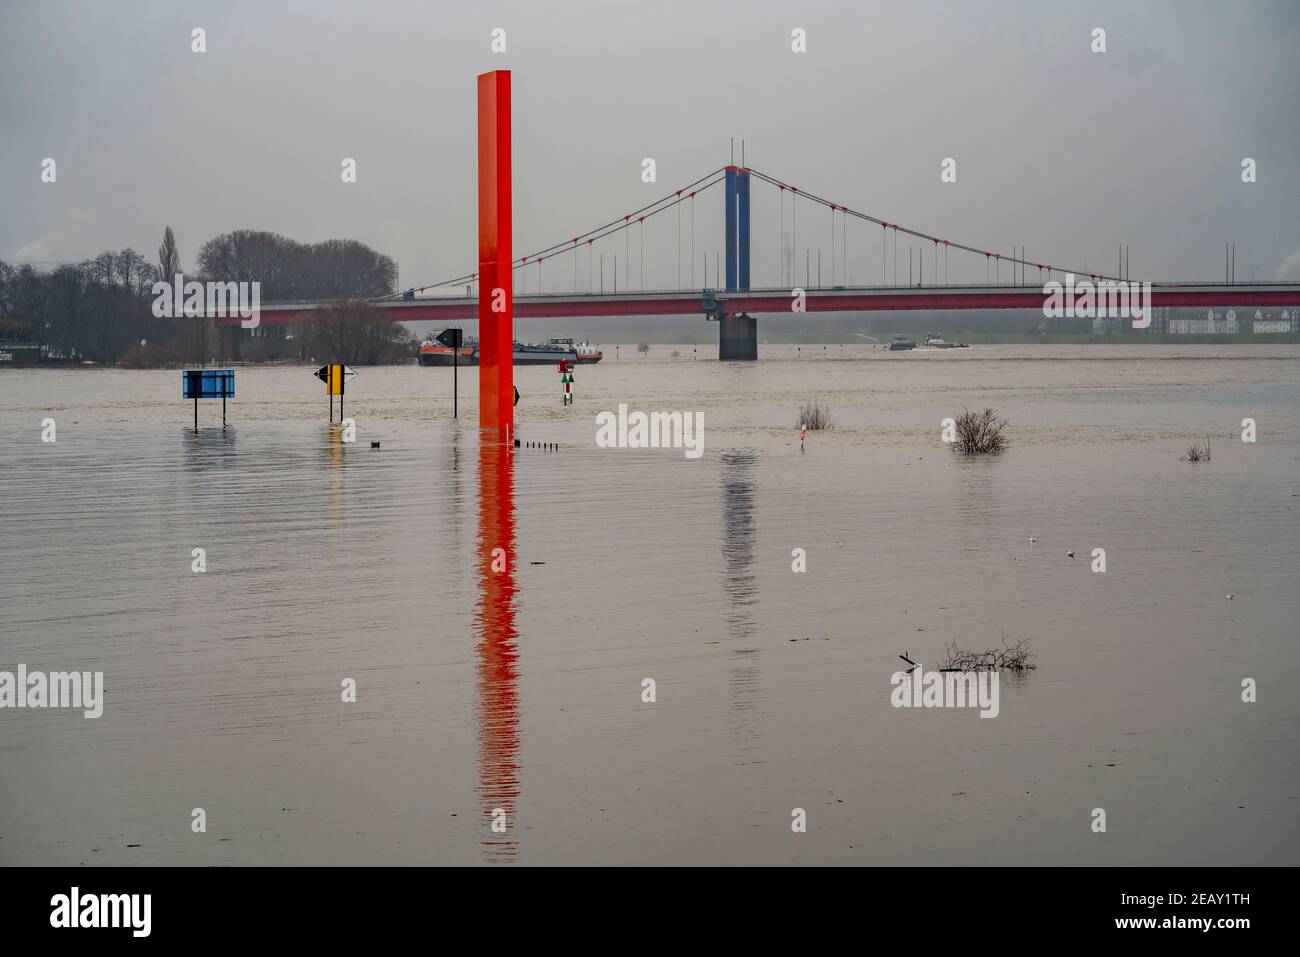 Flooding of the Rhine, Duisburg-Ruhrort, flooding, Rhine orange sculpture at the mouth of the Ruhr, restrictions on shipping, Duisburg, NRW, Germany Stock Photo